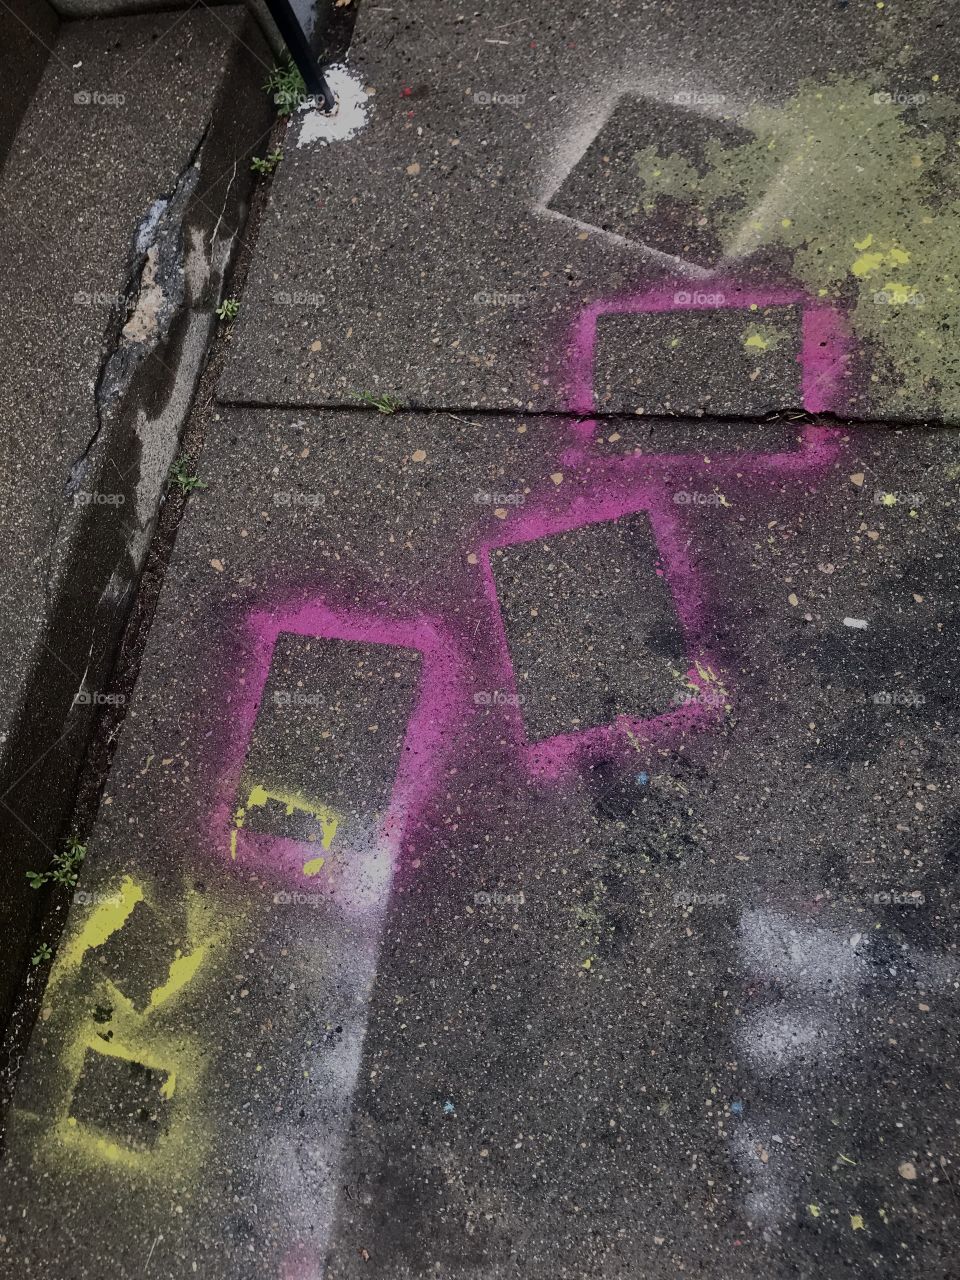 Abstract Art on Wet Pavement 